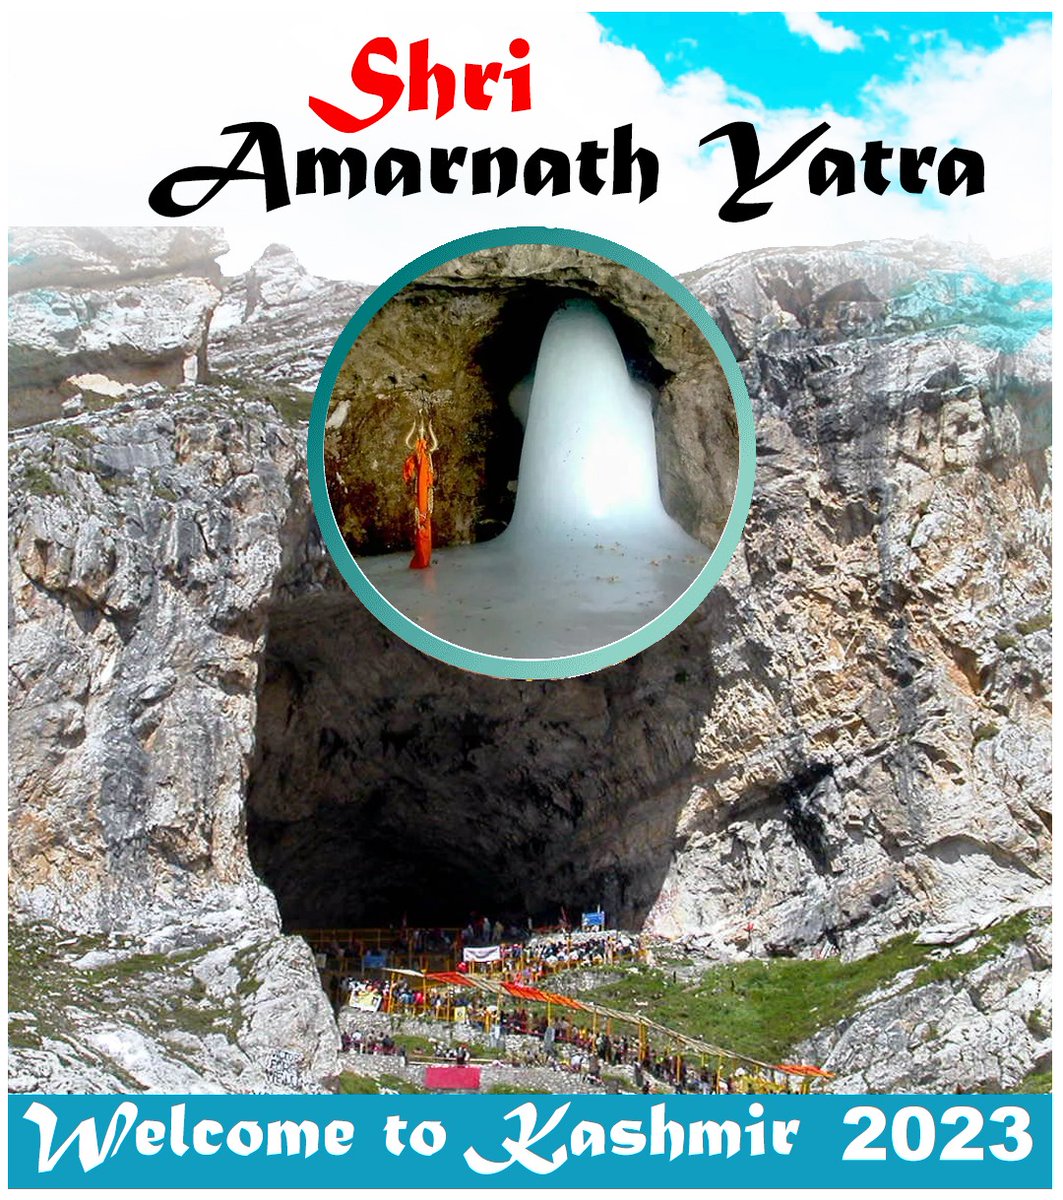 The work on Amarnath yatra track is going on with full swing .The arrangements are in final stage for conducting Amarnath yatra Peaceful.
#AmarnathYatra #AmarnathYatra2023 #SANJY2023 #Amarnath #MeriMaatiMeraDesh 
#AtalBihariVajpayee  
#ParsiNewYear